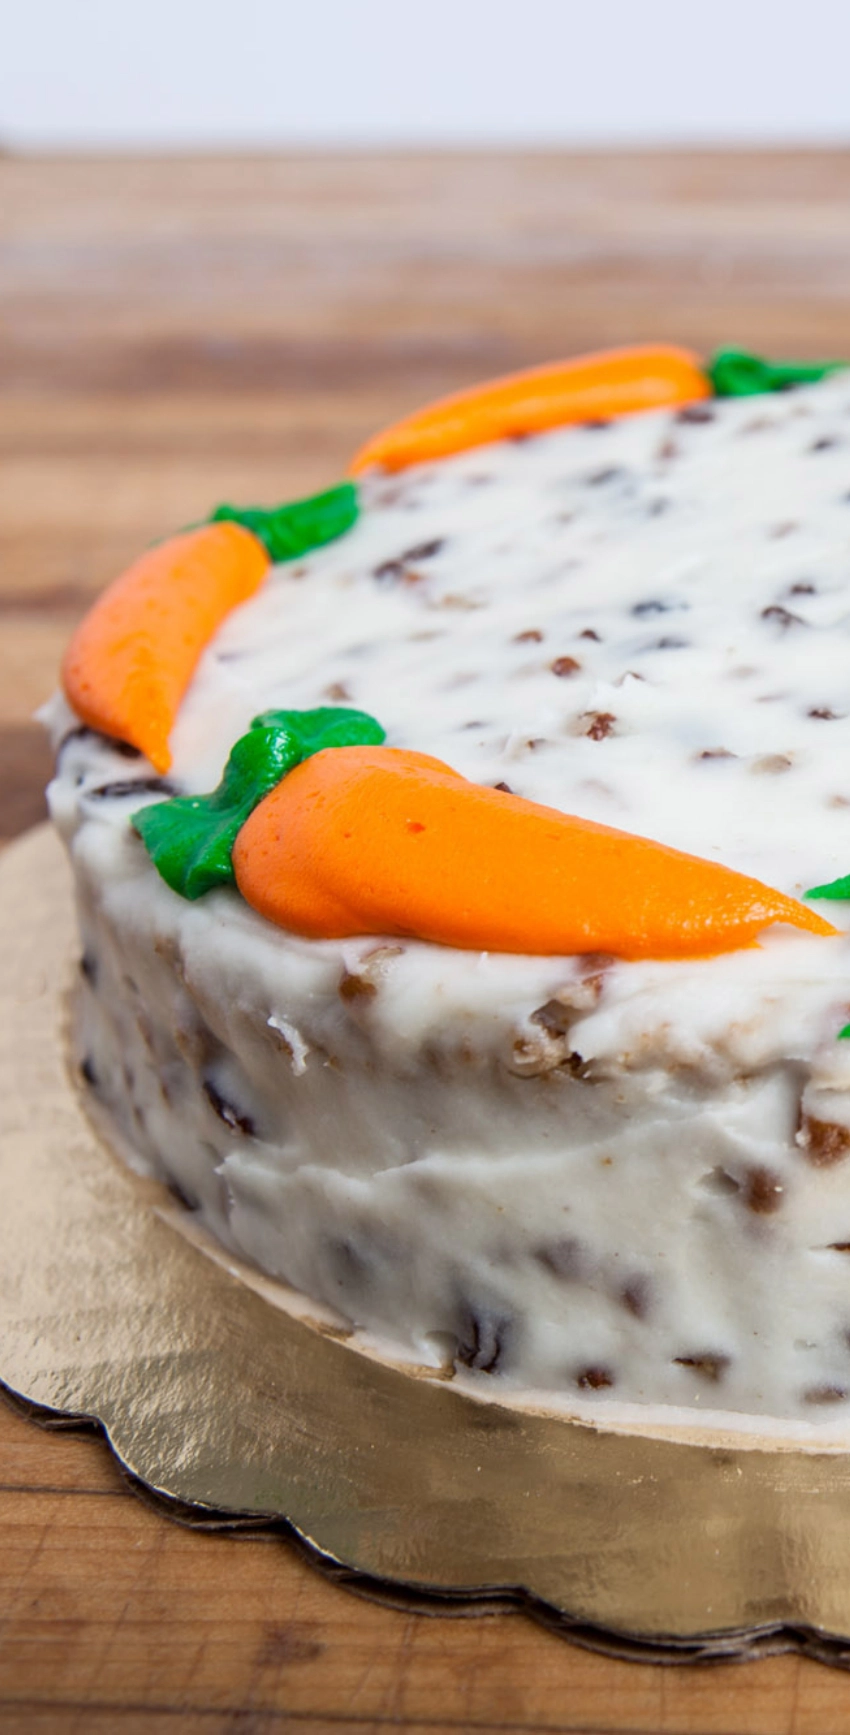 Carrot cake topped with cream cheese frosting and decorated with orange carrot-shaped icing.